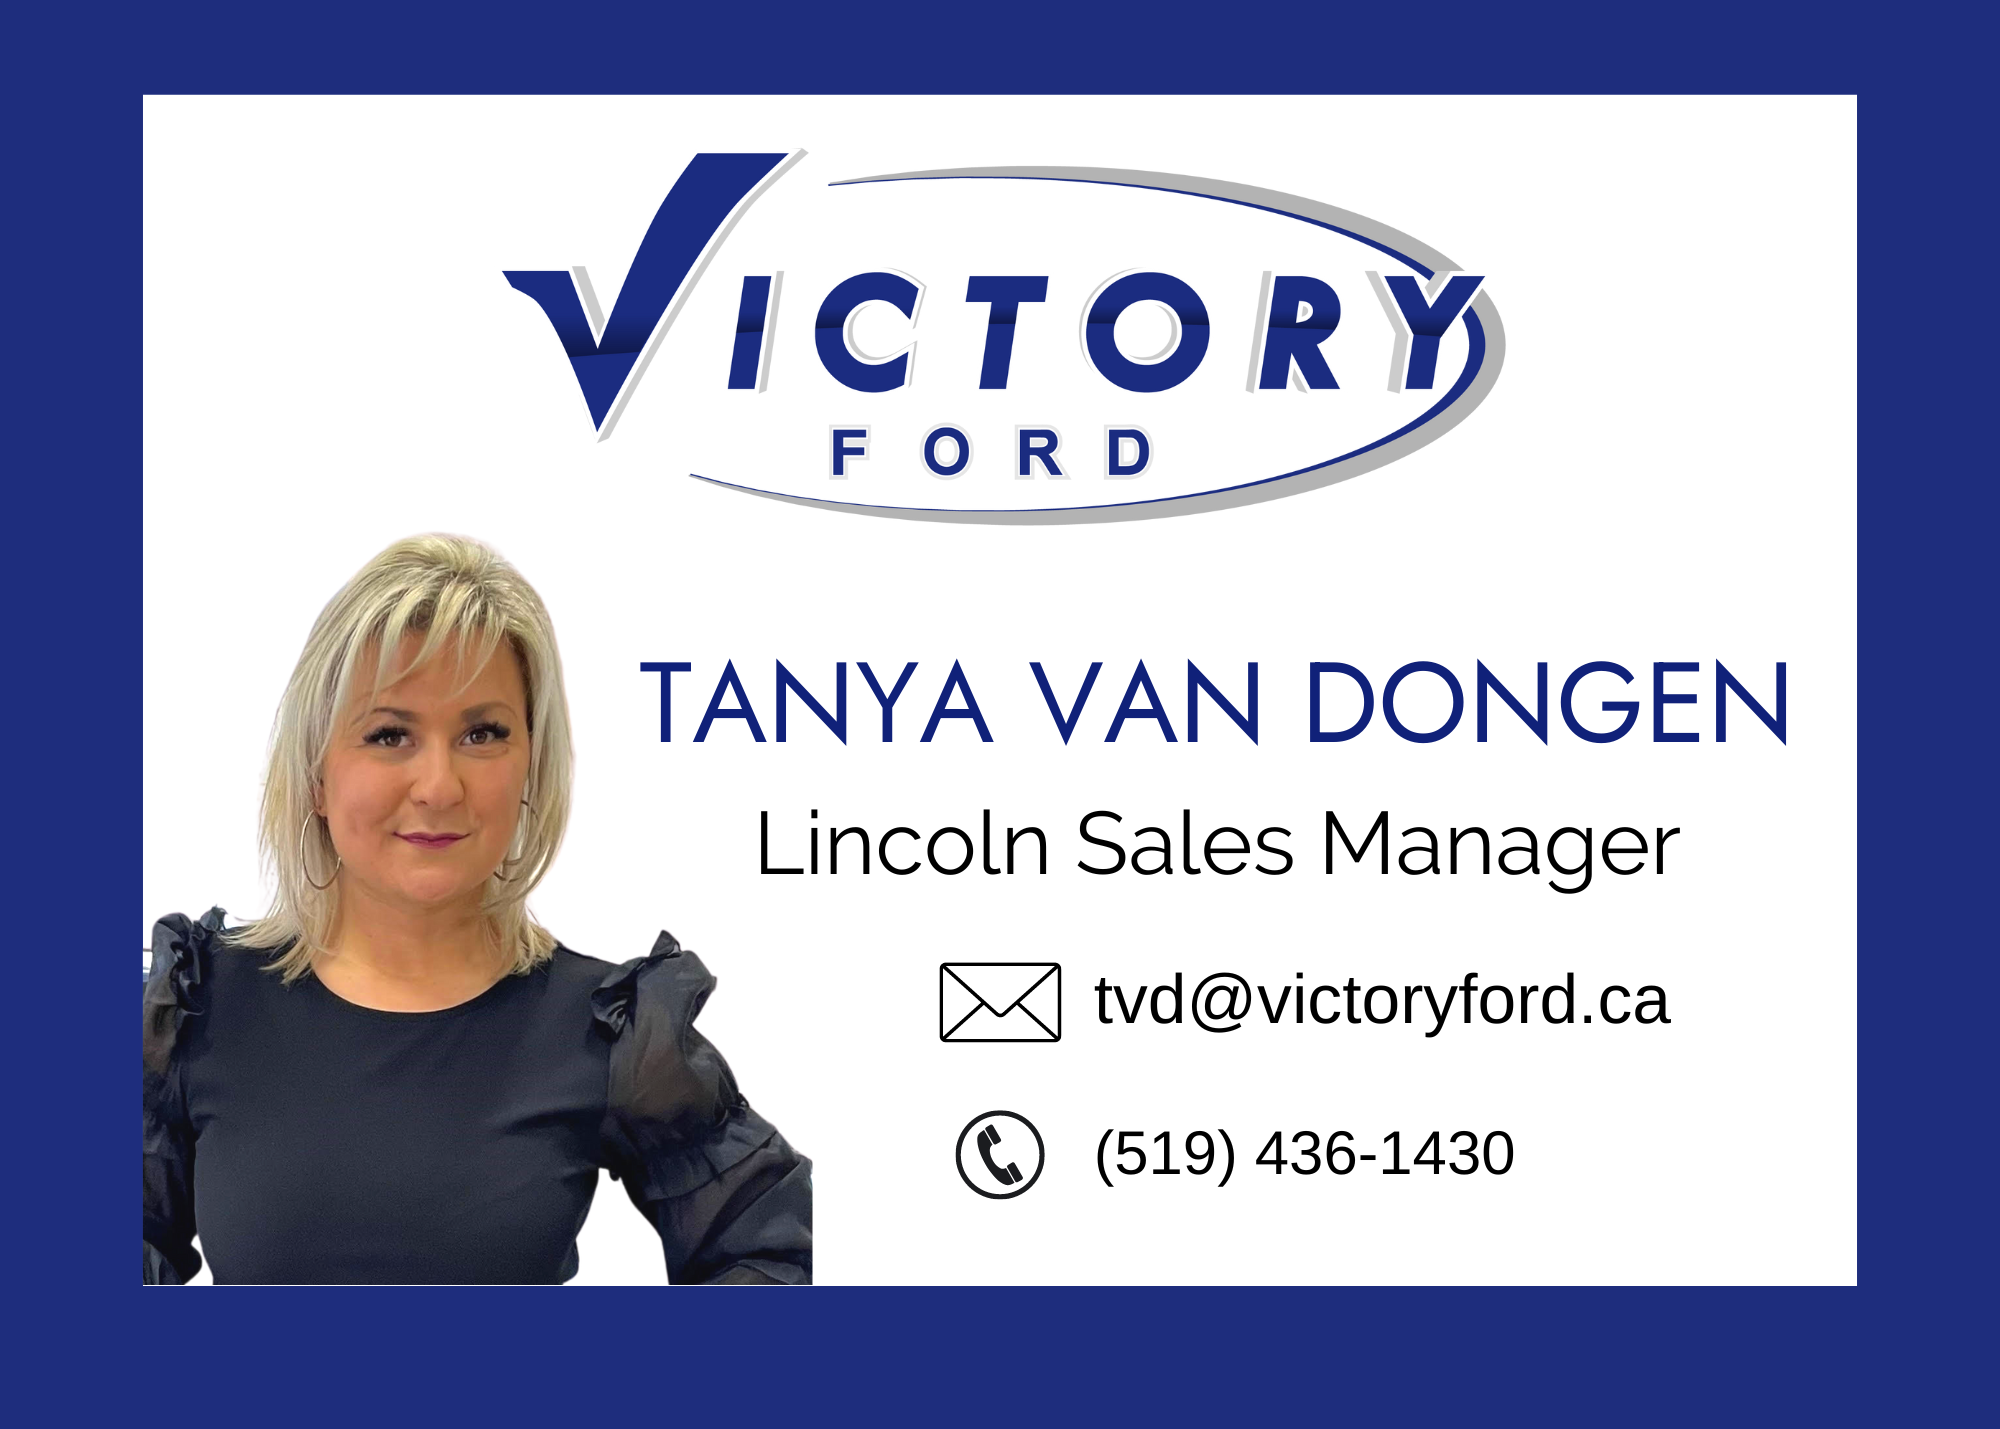 tanya van dongen lincoln sales manager, victory ford